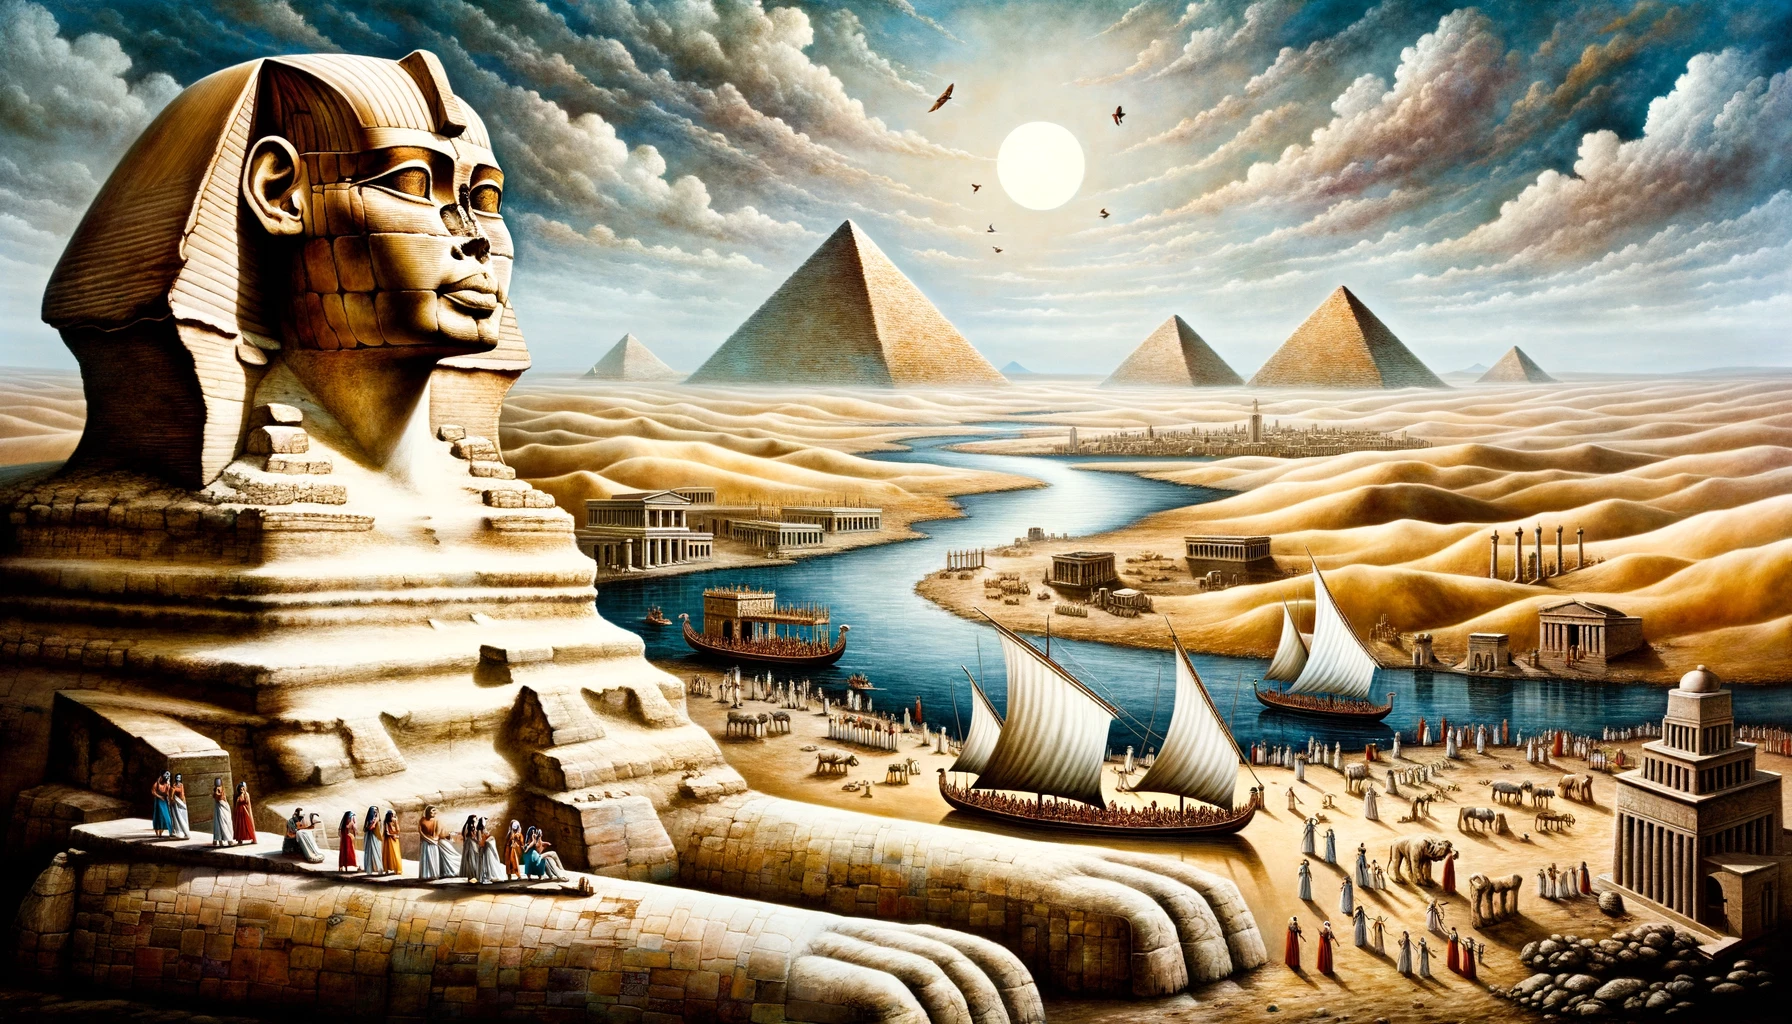 Artistic depiction of a day in ancient Egypt. The vast desert provides a contrasting backdrop to the magnificent pyramids, which stand tall and proud. Nearby, a detailed sphinx, with eyes that seem to have seen centuries, guards the entrance to the sacred lands. The Nile, wide and meandering, adds a touch of blue to the sandy palette. Merchants on boats, with goods stacked high, engage in lively trade, representing the commerce of the era.